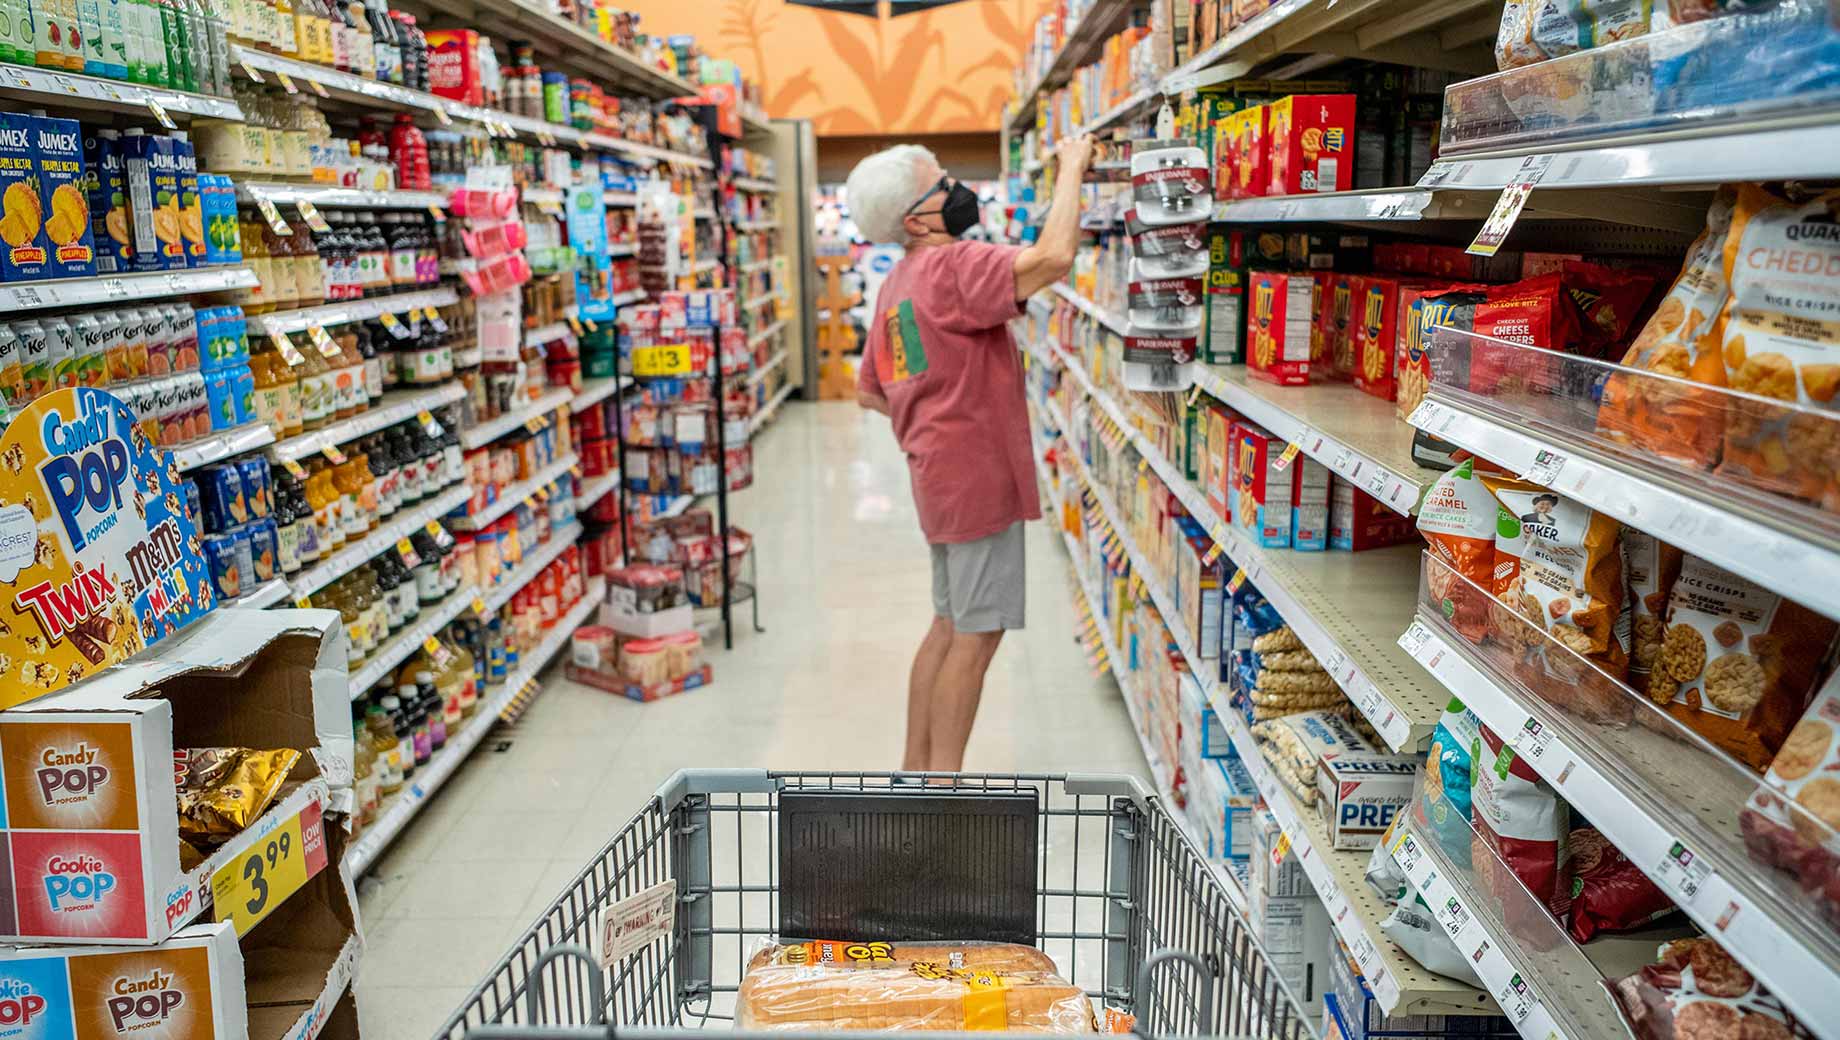 In-Person Grocery Shopping Rebounds in U.S.; Online Also Up